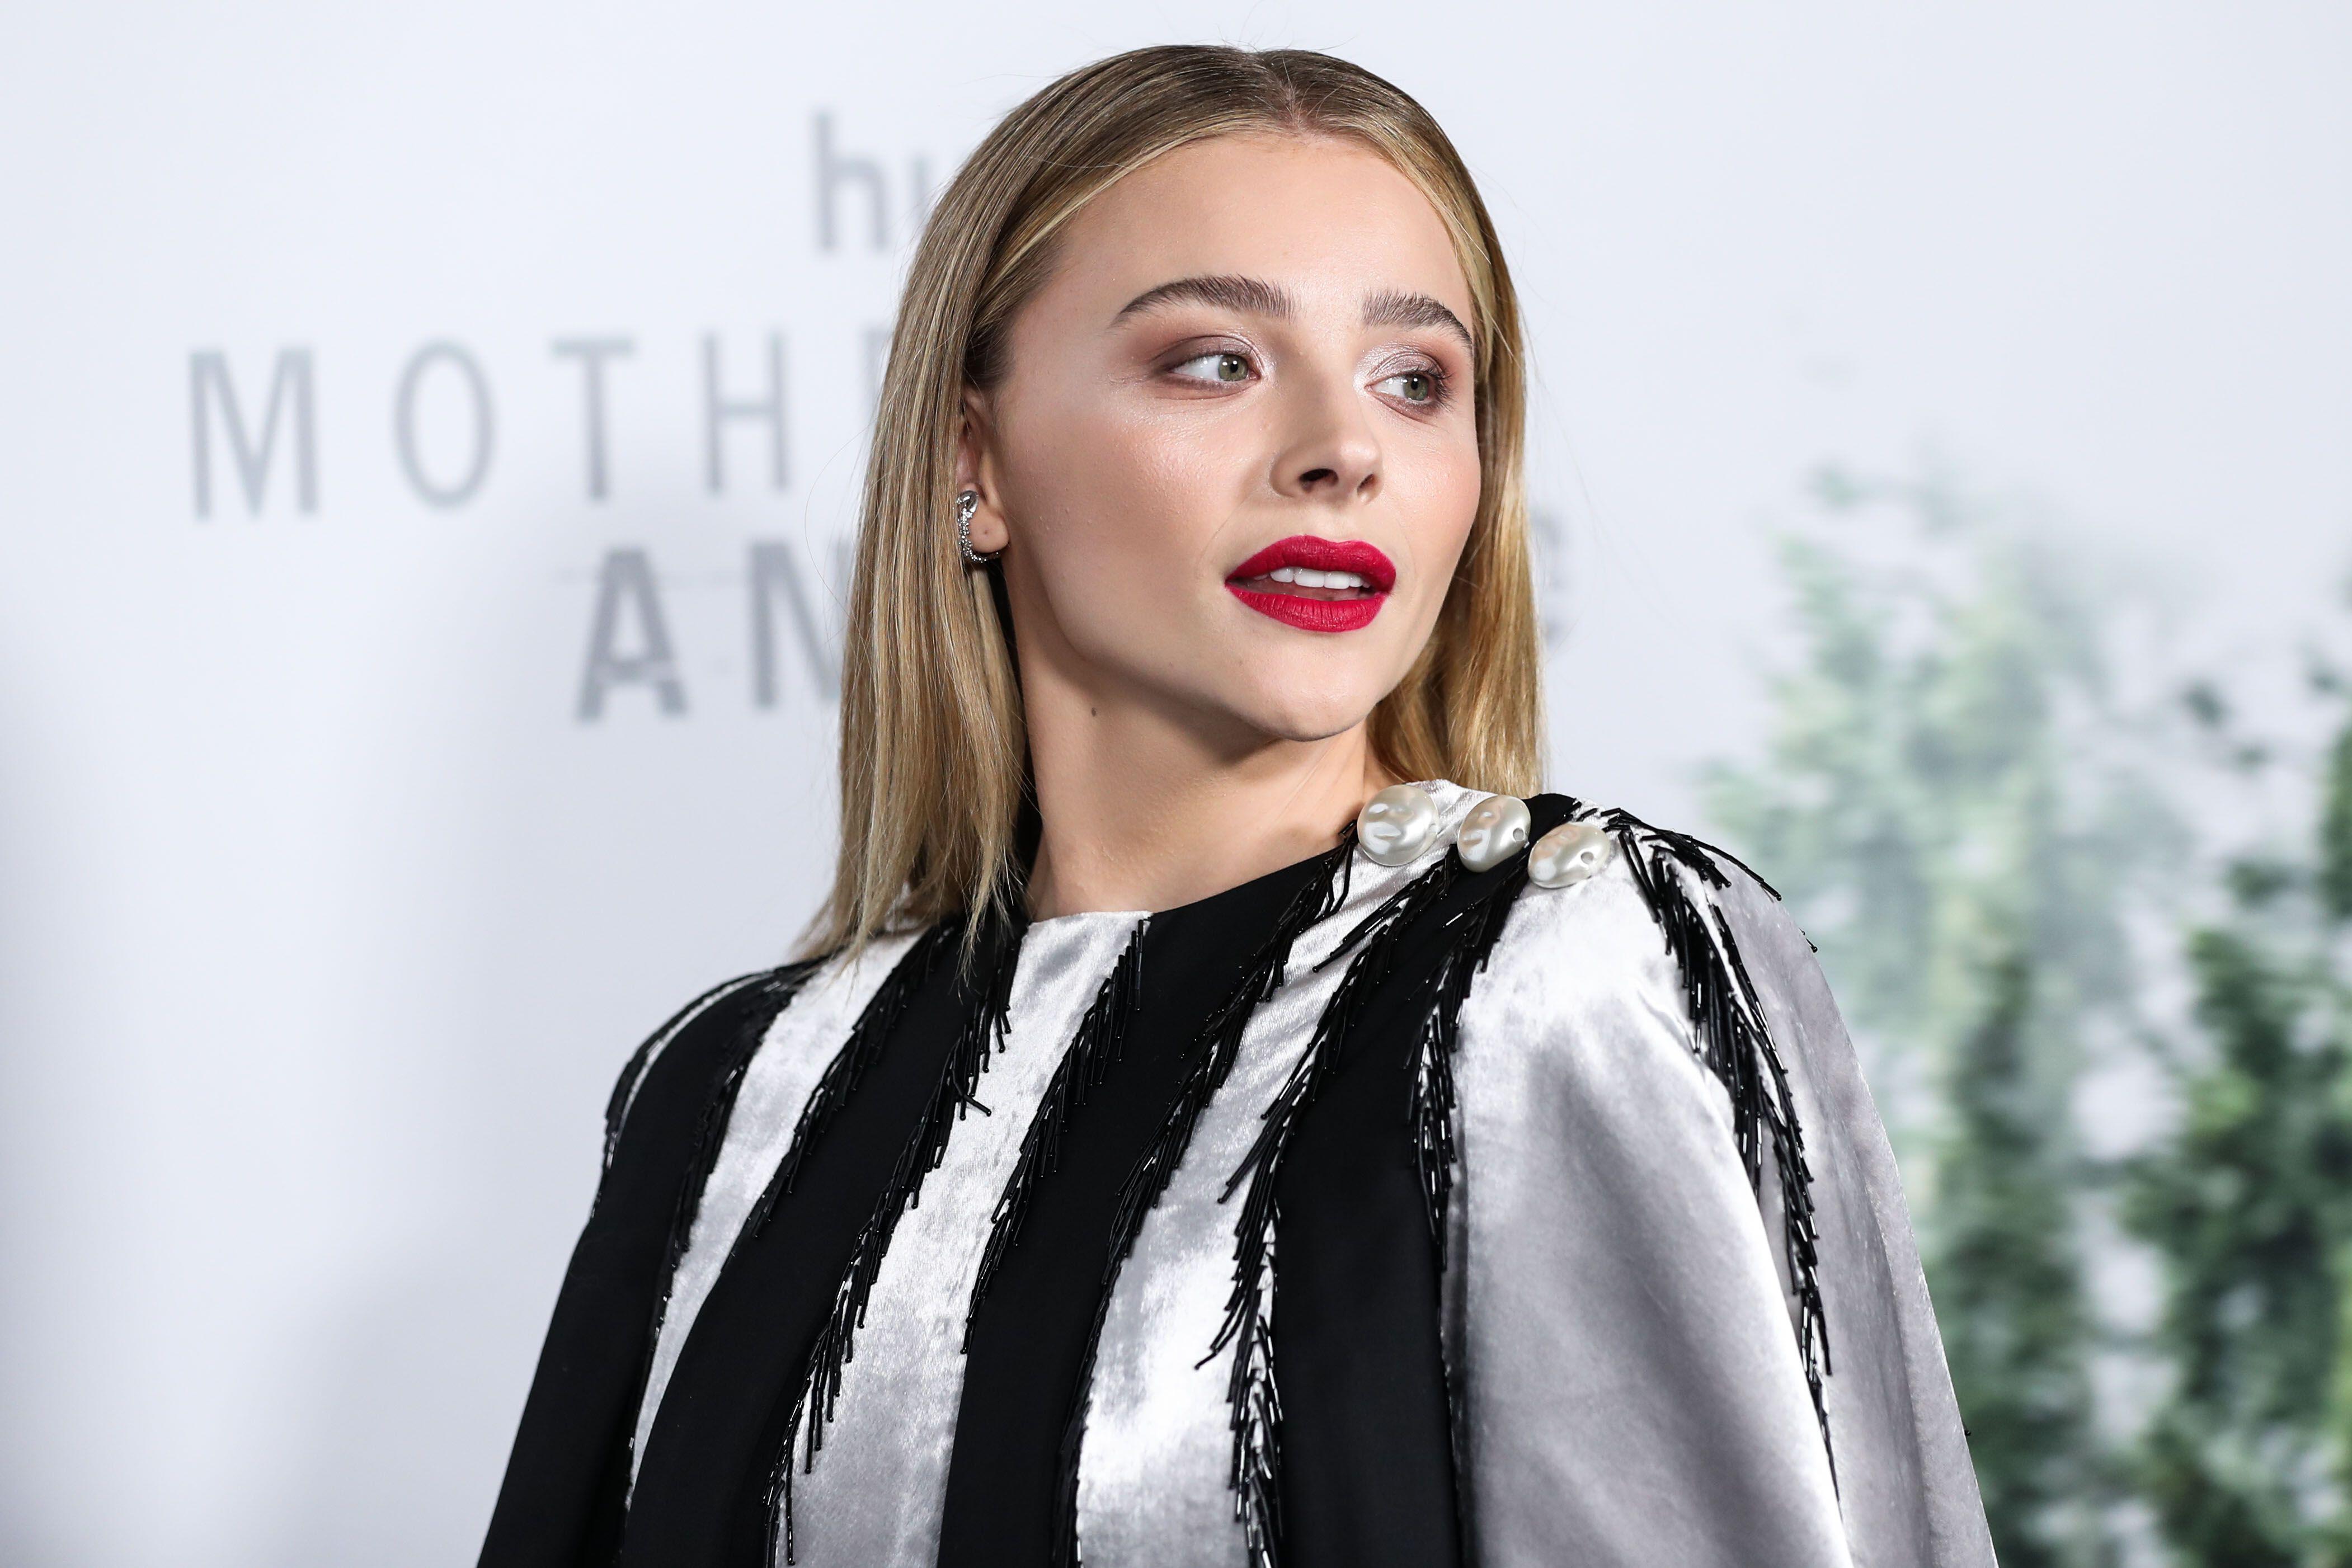 Chloë Grace Moretz Reveals She Became a Recluse With Anxiety After Seeing a  Meme of Herself That Went Viral / Bright Side